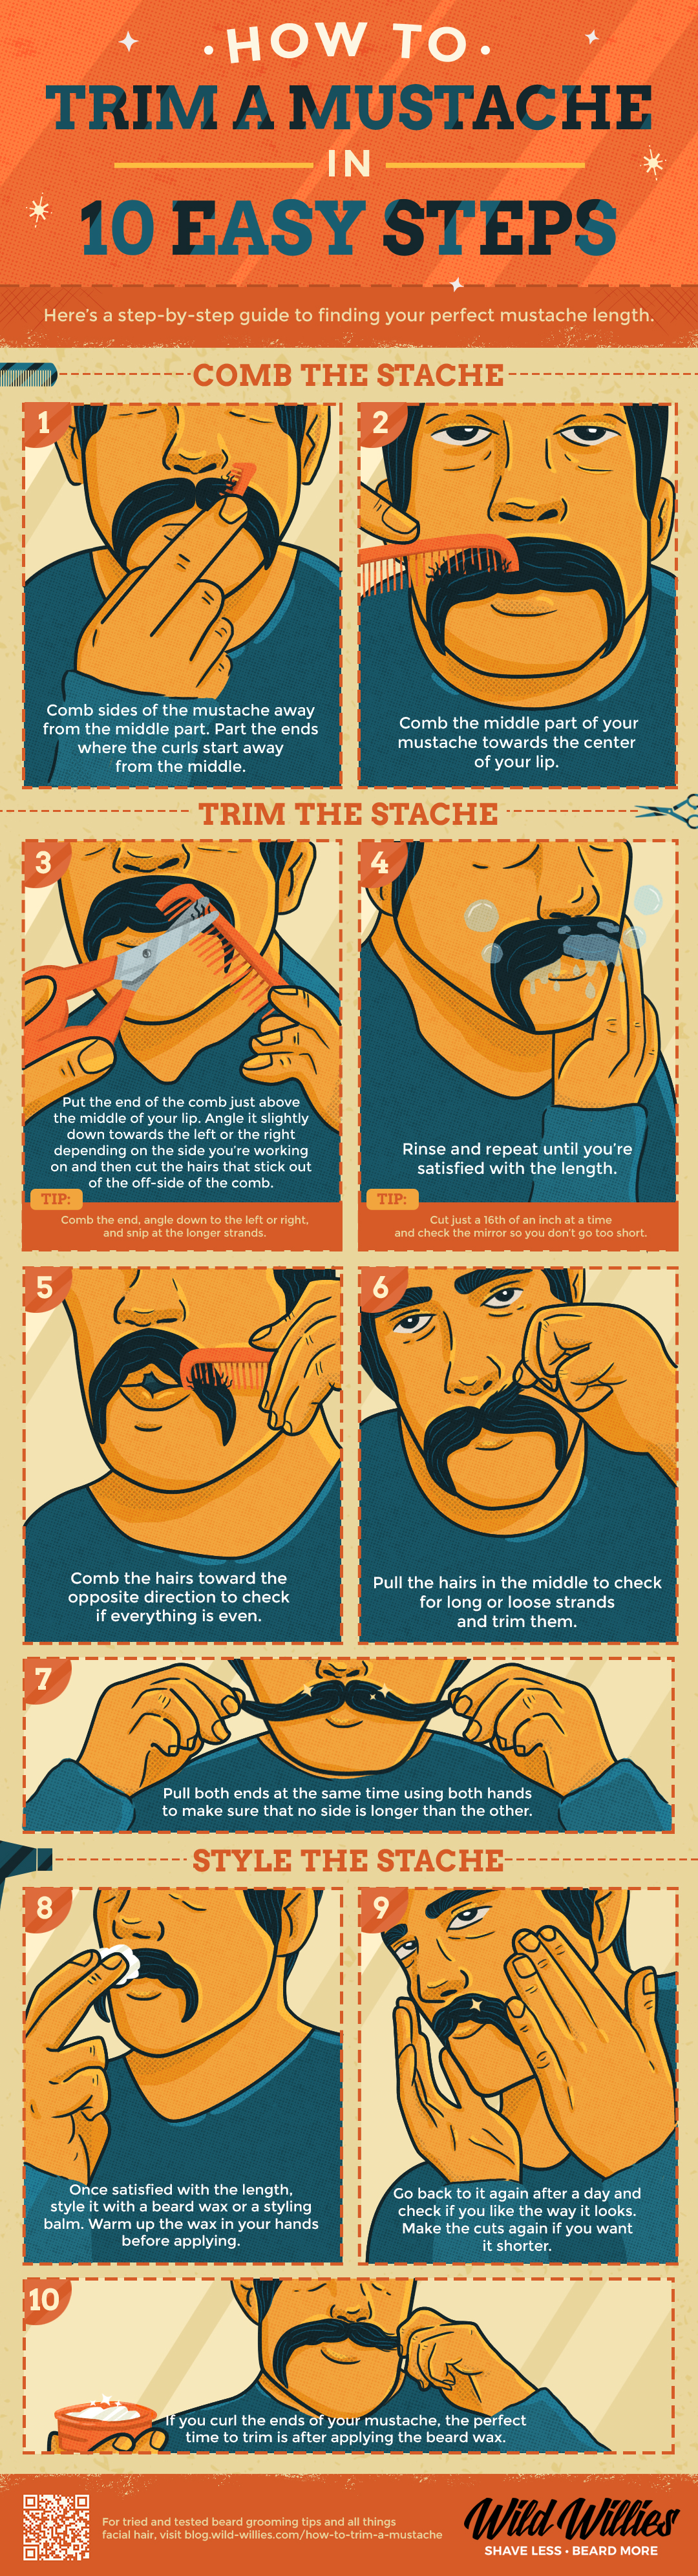 How To Trim A Mustache in 10 Easy Steps